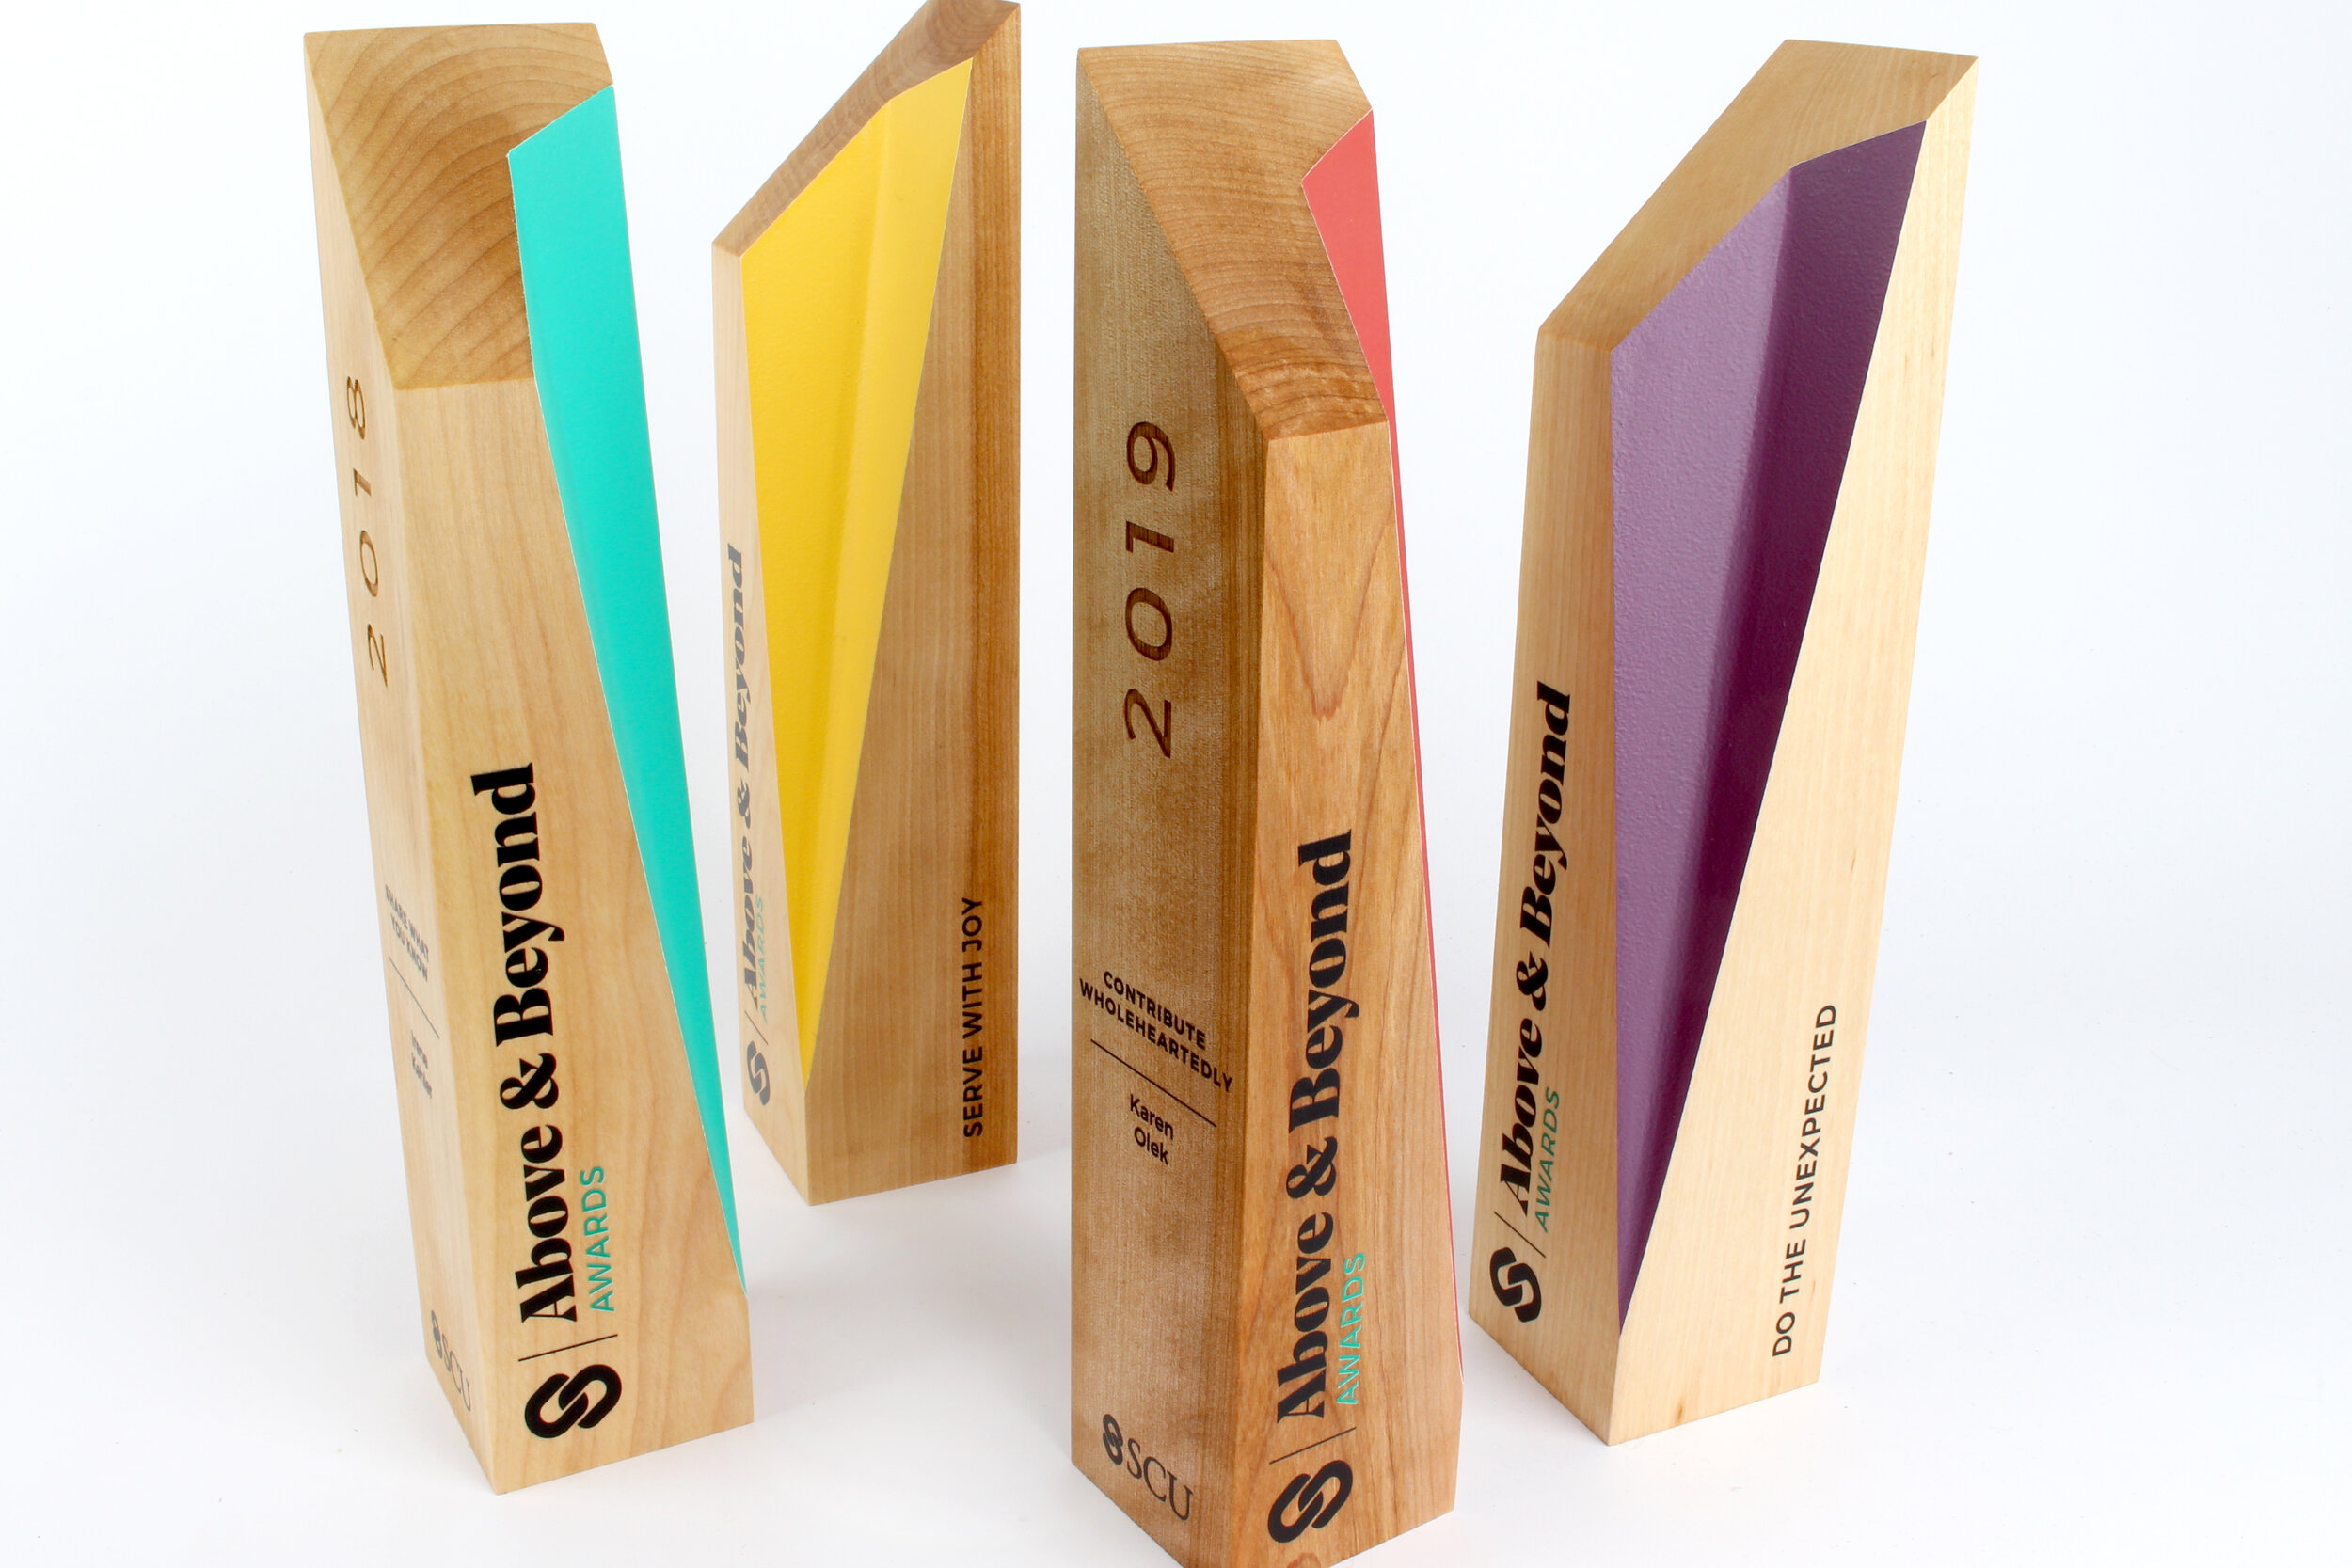 SCU modern beautiful sustainable wooden awards great for corporate recognition or service awards 3